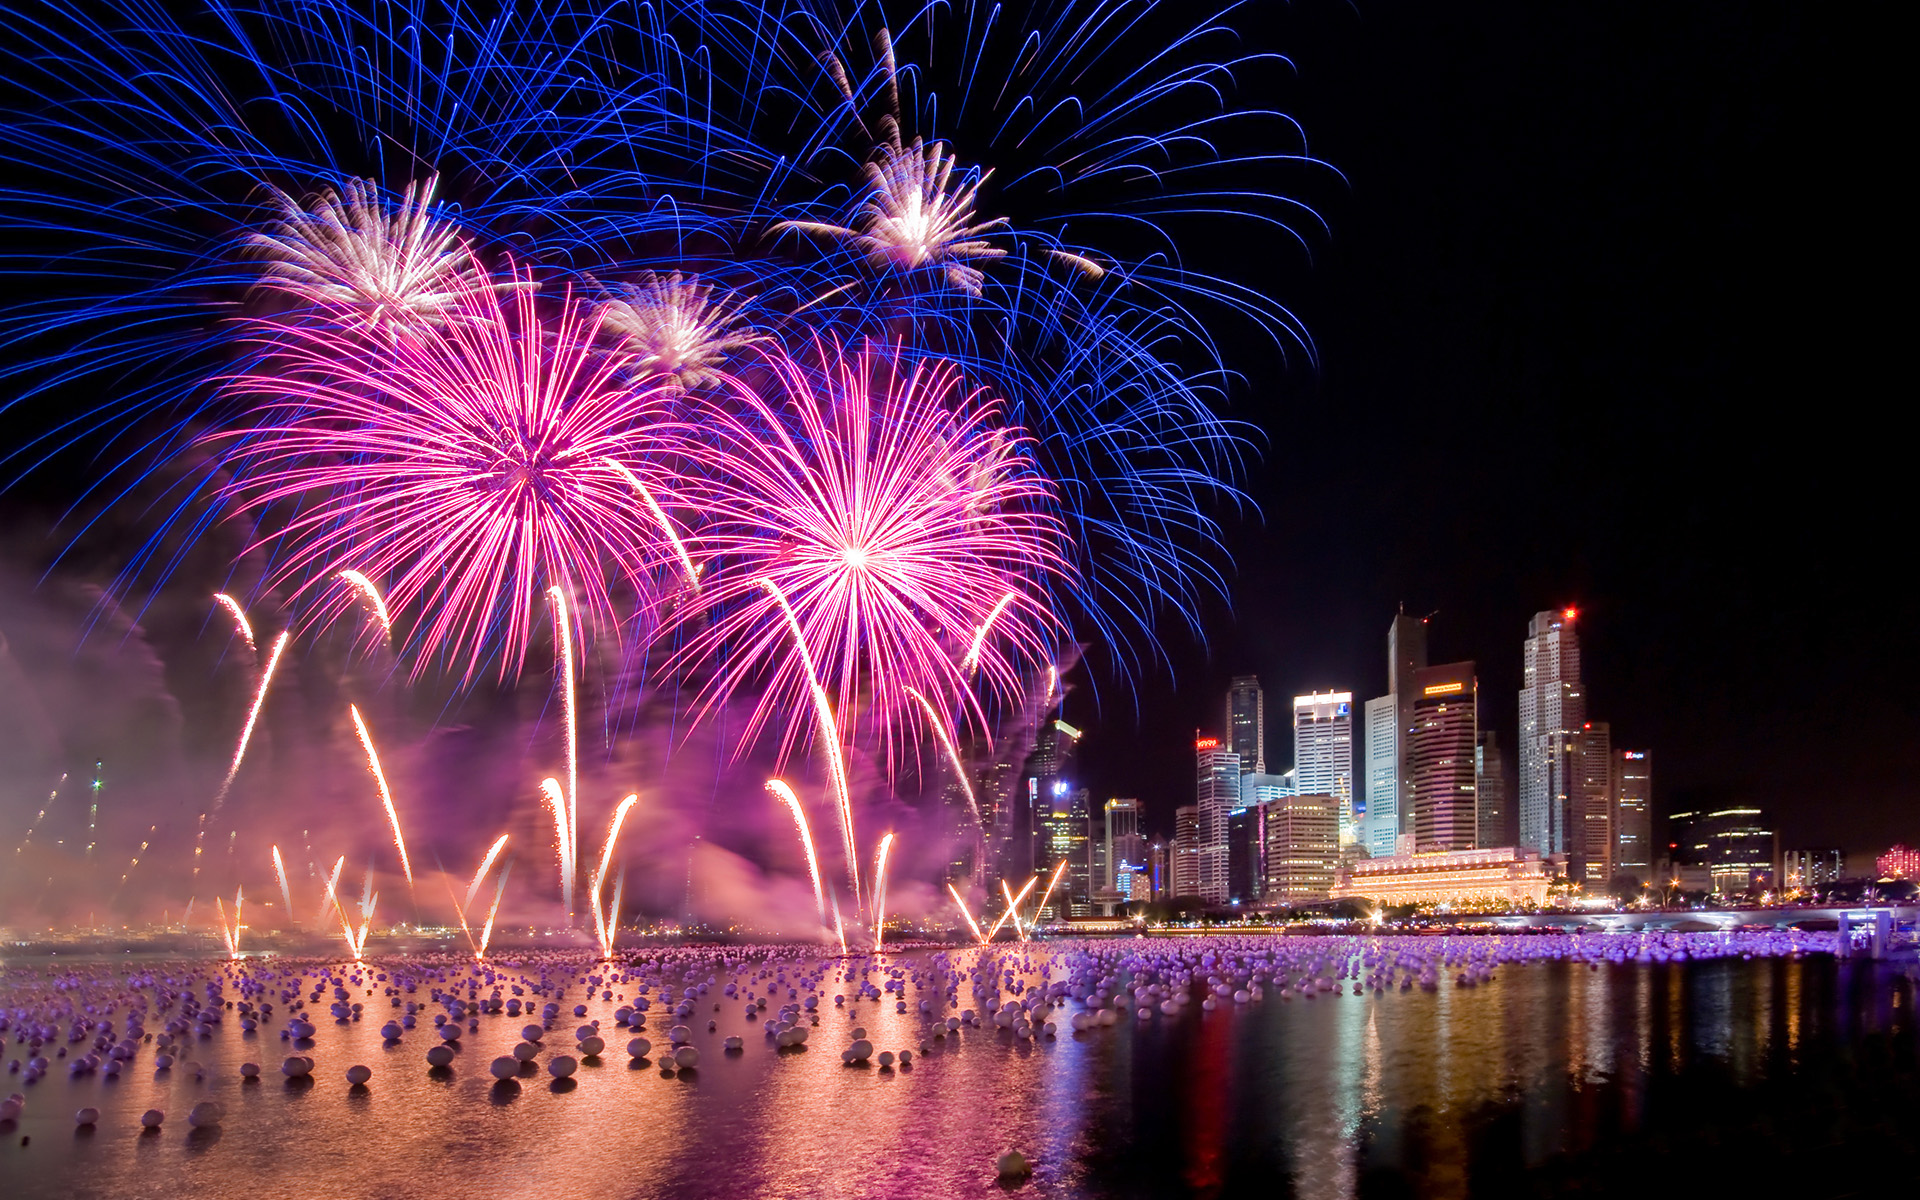 Fireworks on New Year's Eve, Singapore HD Wallpaper